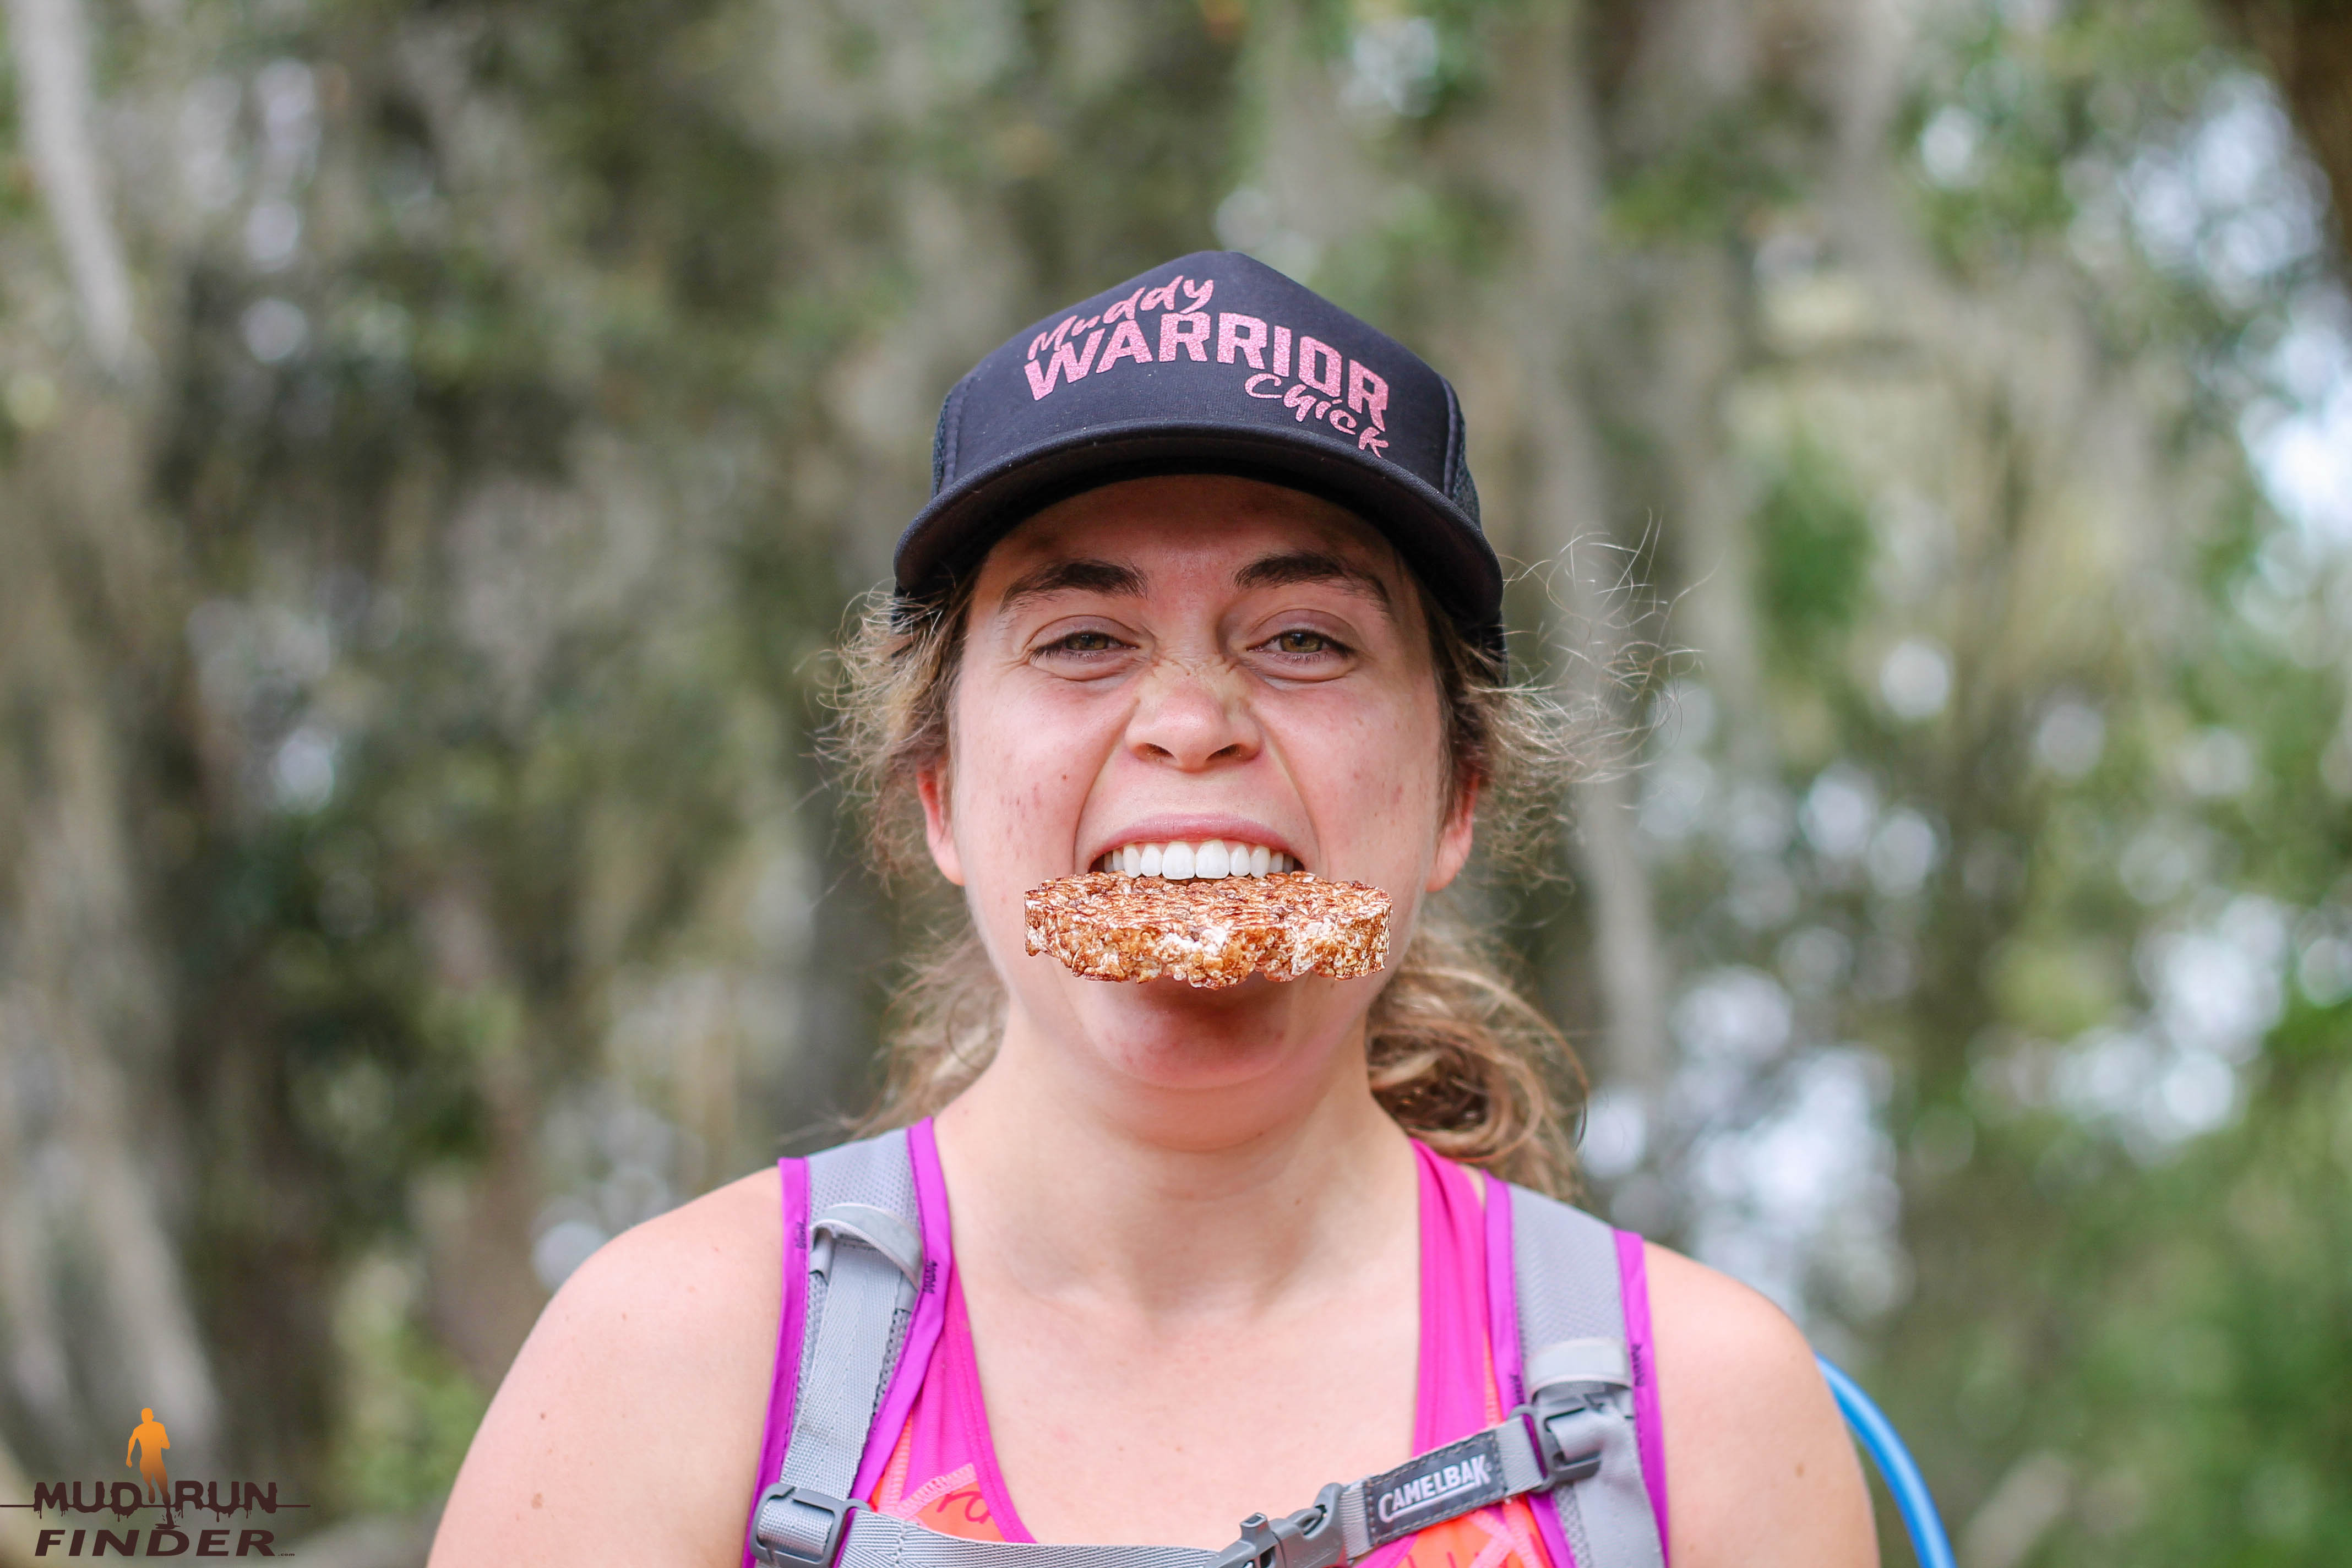 GroundHog Events presents Ares’ Vengeance Trail Race: Powered By Pickle Juice Sport - March 10th, 2018 in Alachua, FL | Photo Credit: Mud Run Finder